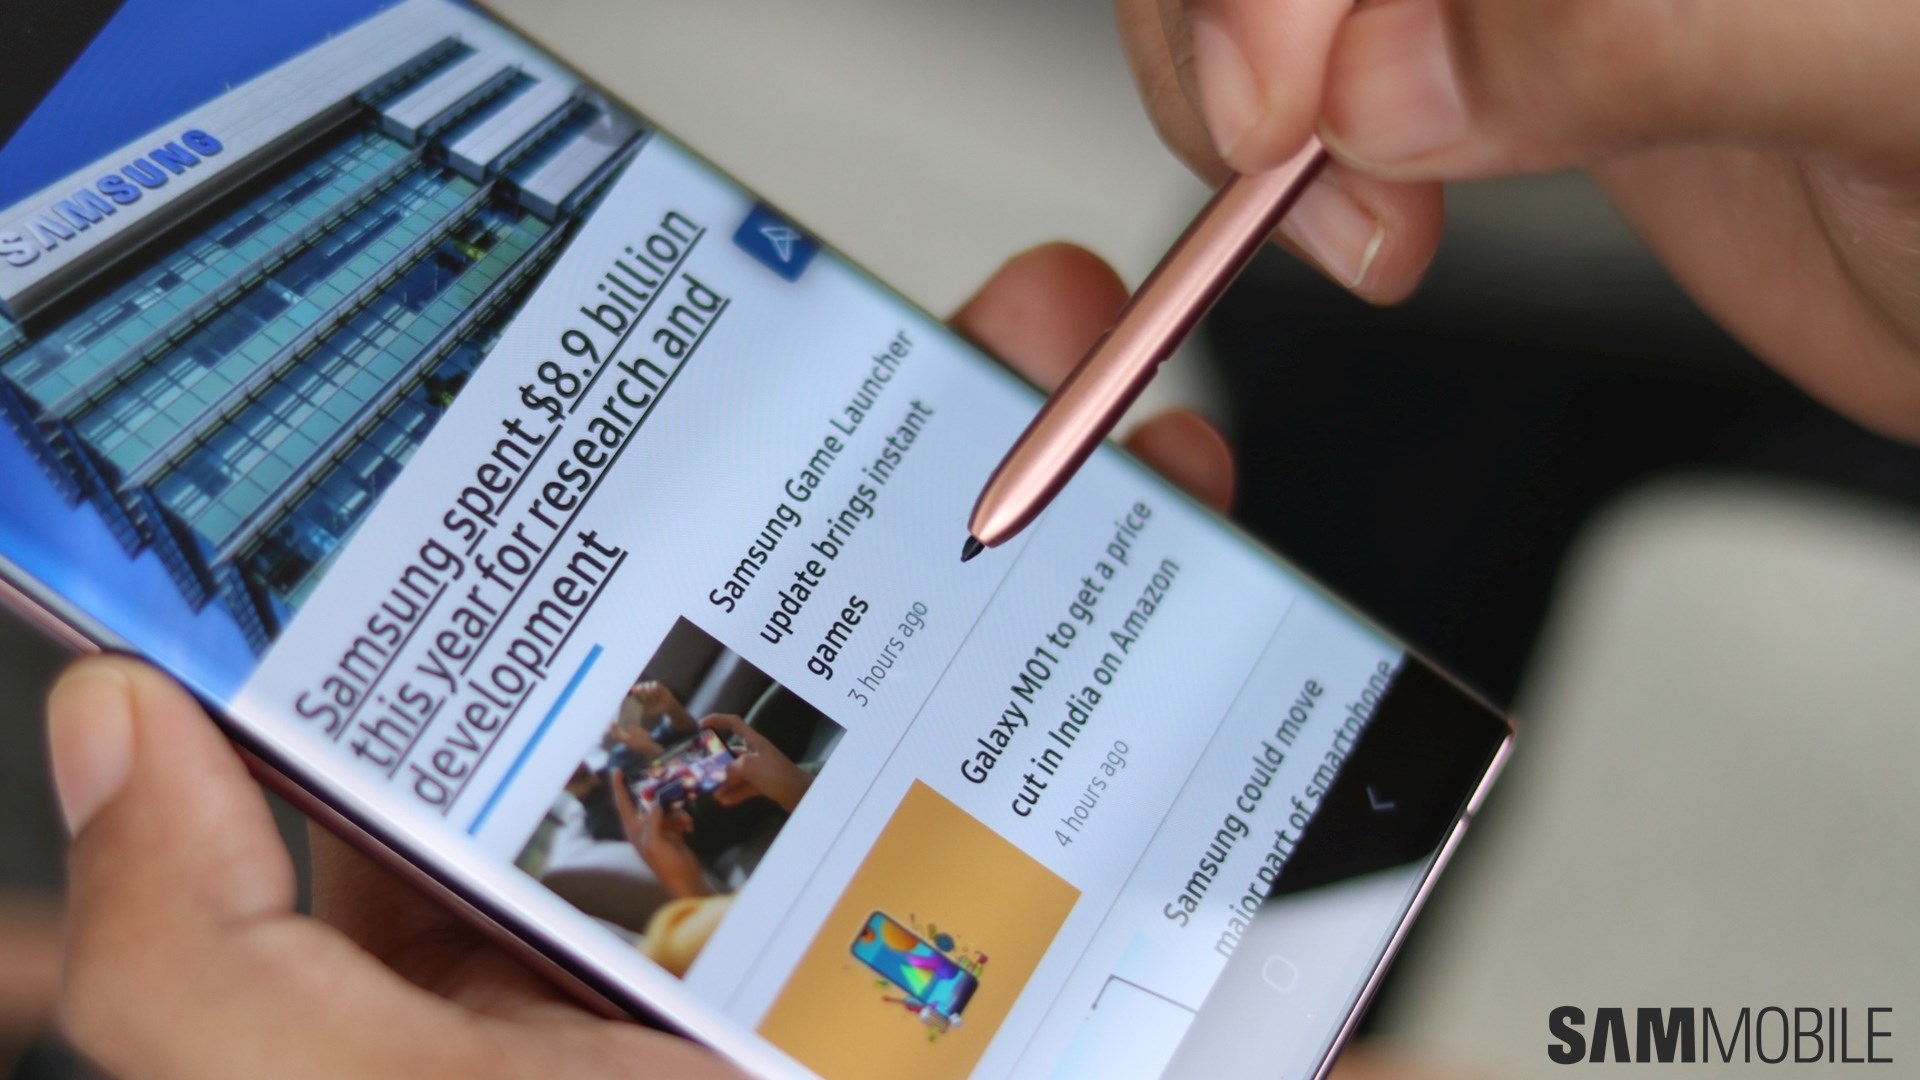 Samsung Galaxy Note 20 Ultra review: More like a Galaxy Note 20+